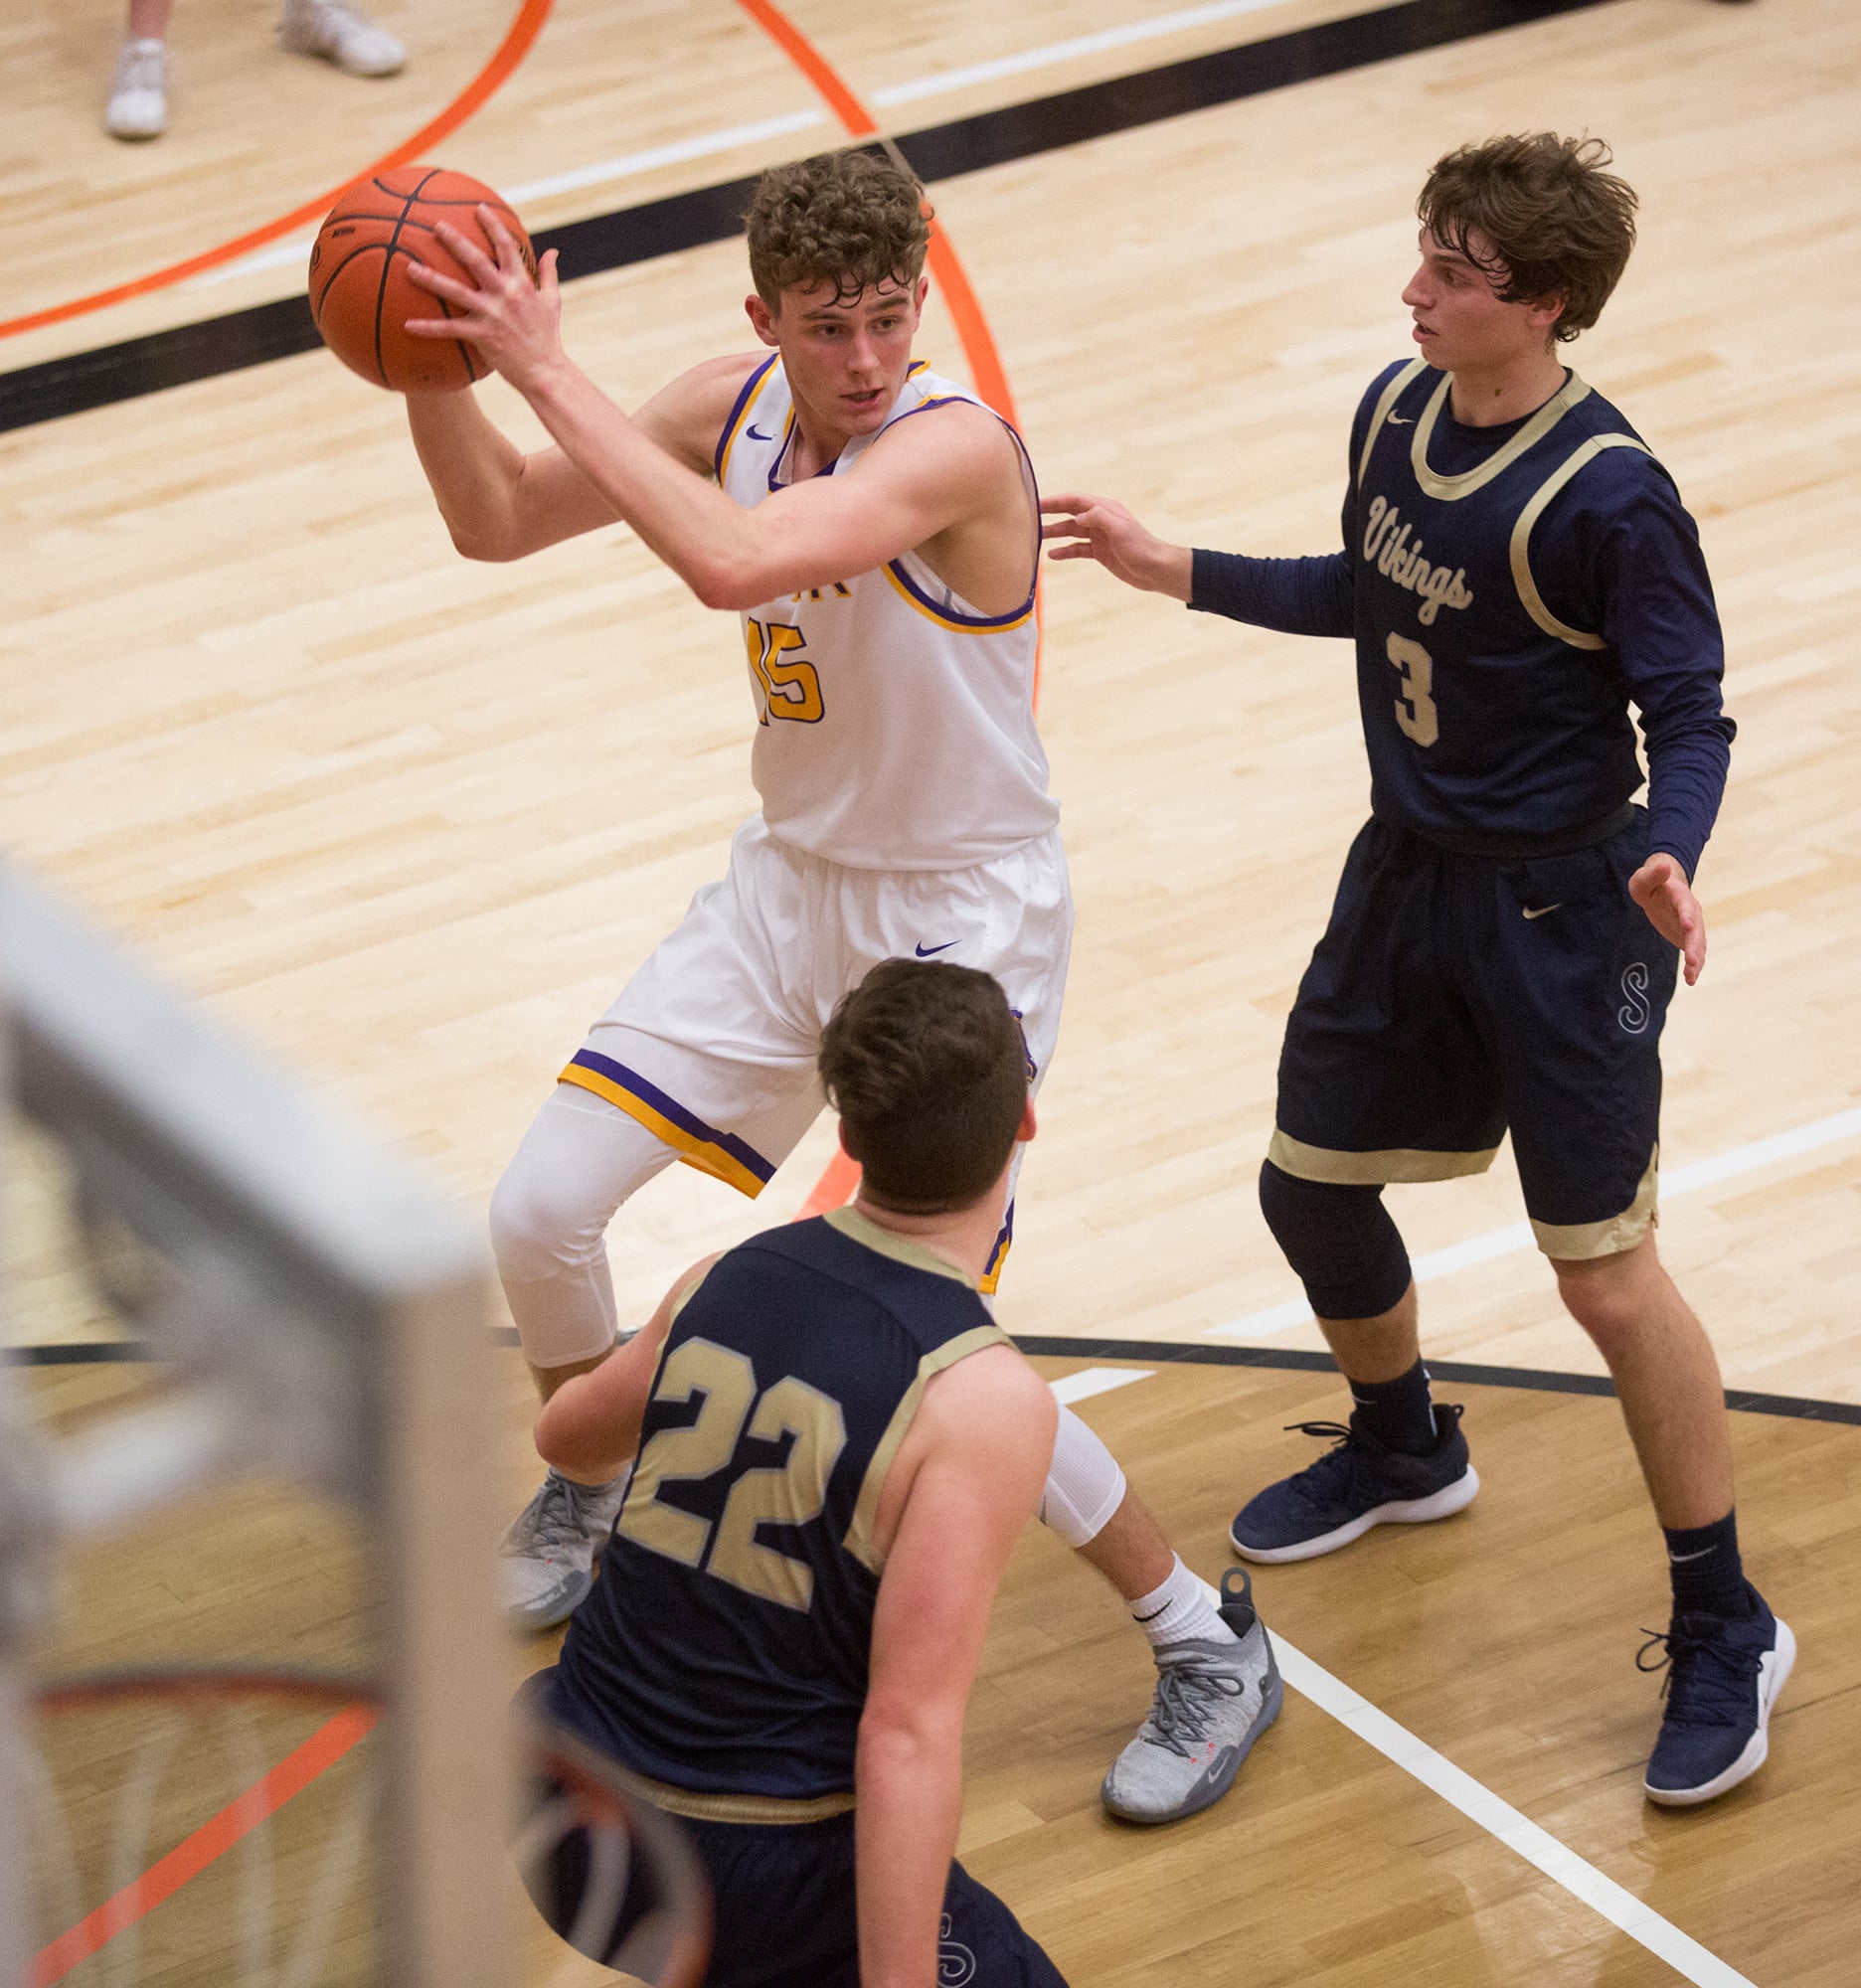 Columbia River's Evan Dirksen (15) looks to pass the ball while being defended by Selah's Calvin Herting (3) and Noah Pepper (22) during the second half of a 2A regional basketball game at Battle Ground High School, Saturday, Feb. 23, 2019. Selah defeated Columbia River 66-61.